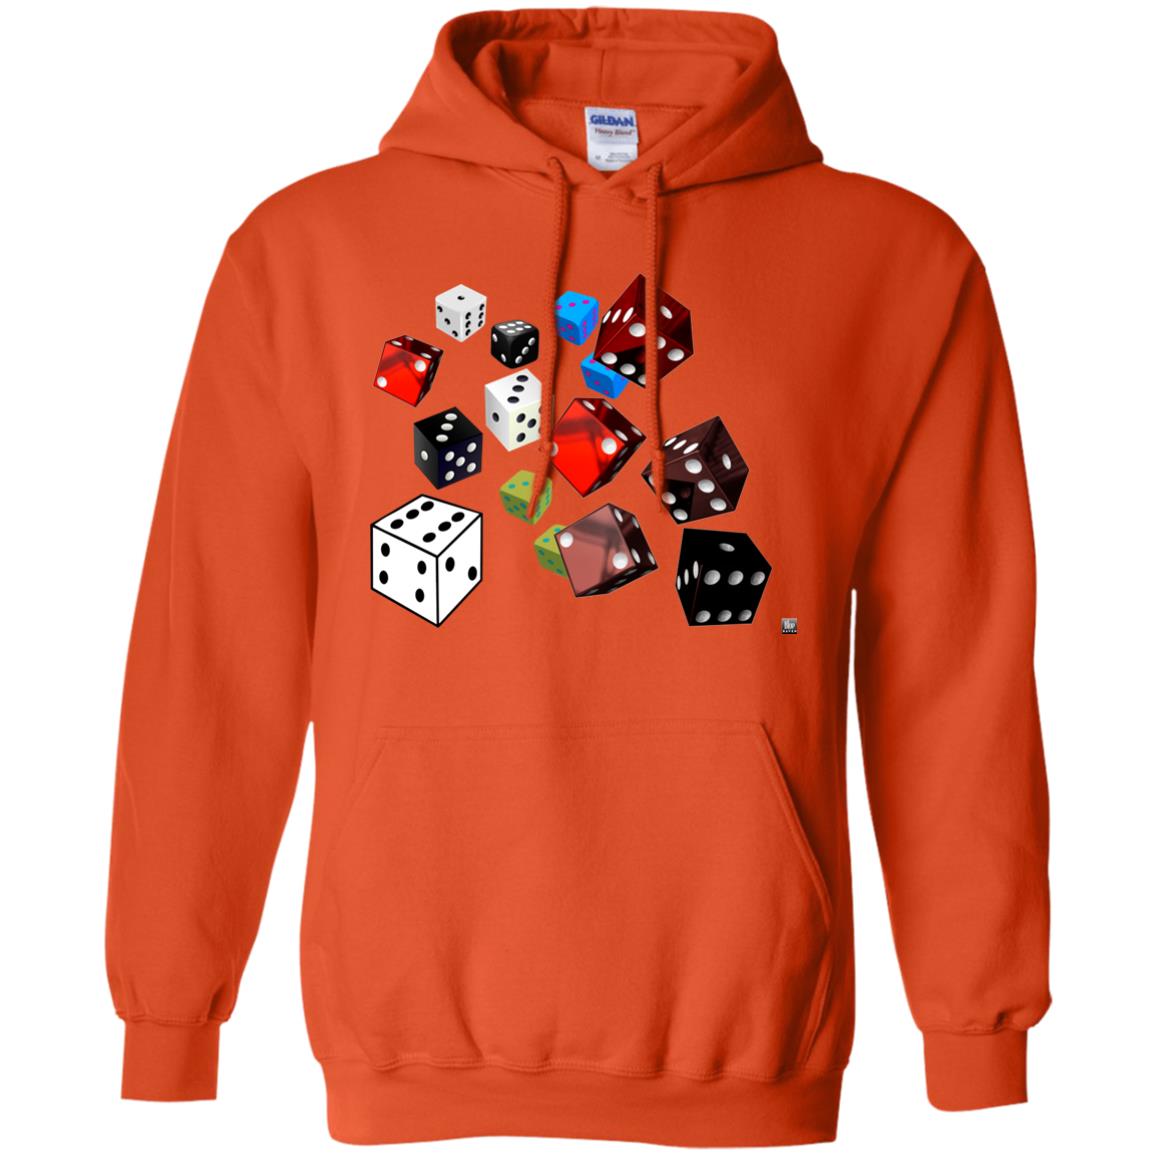 roll of the dice - Adult Hoodie